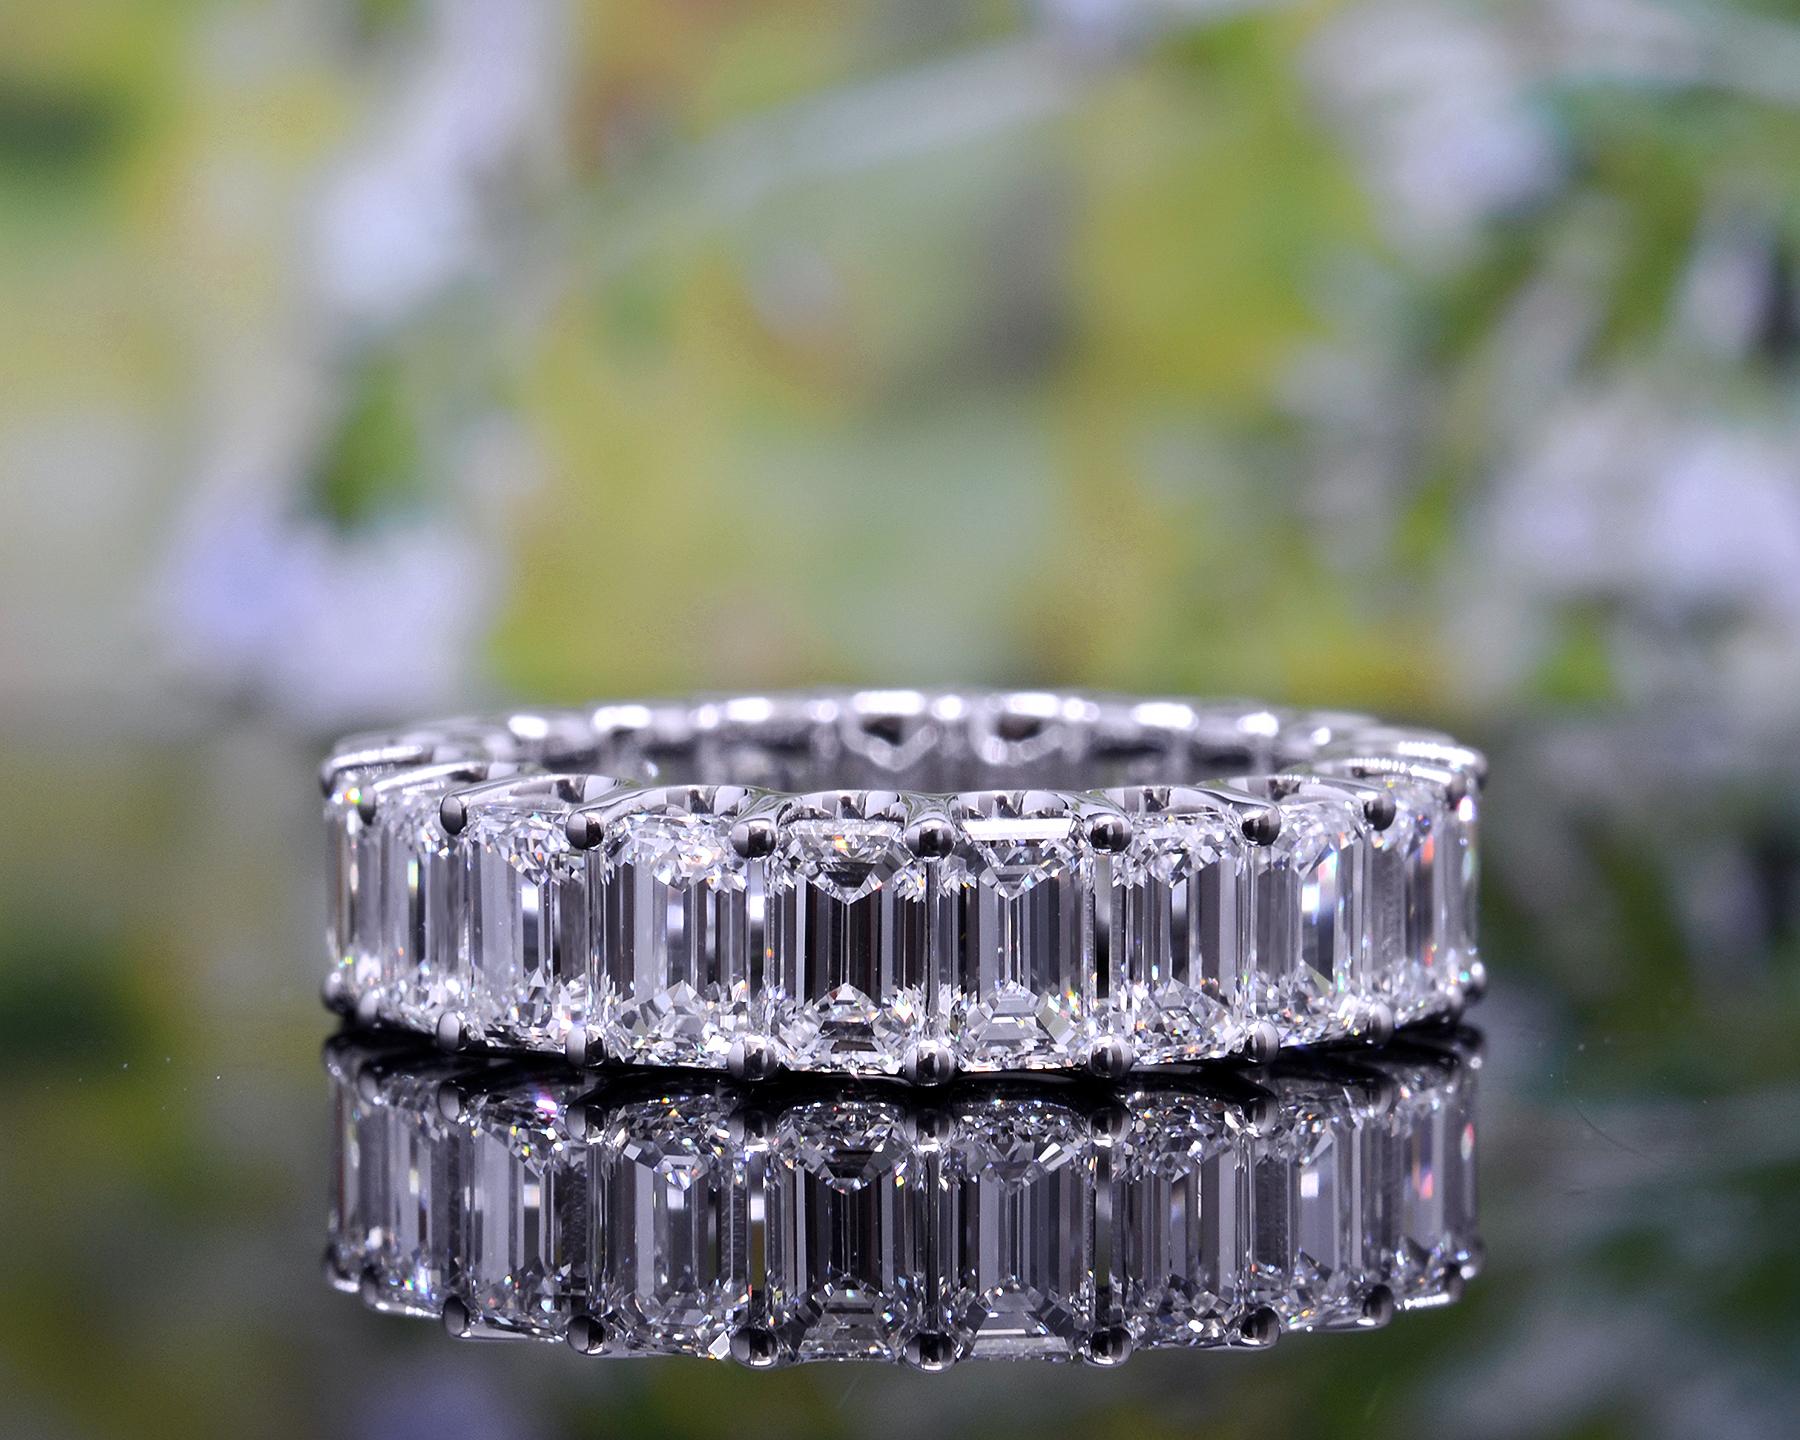 For Sale:  6 Carats Emerald Cut Eternity Band Shared Prongs F-G Color VS1 Clarity Platinum 3